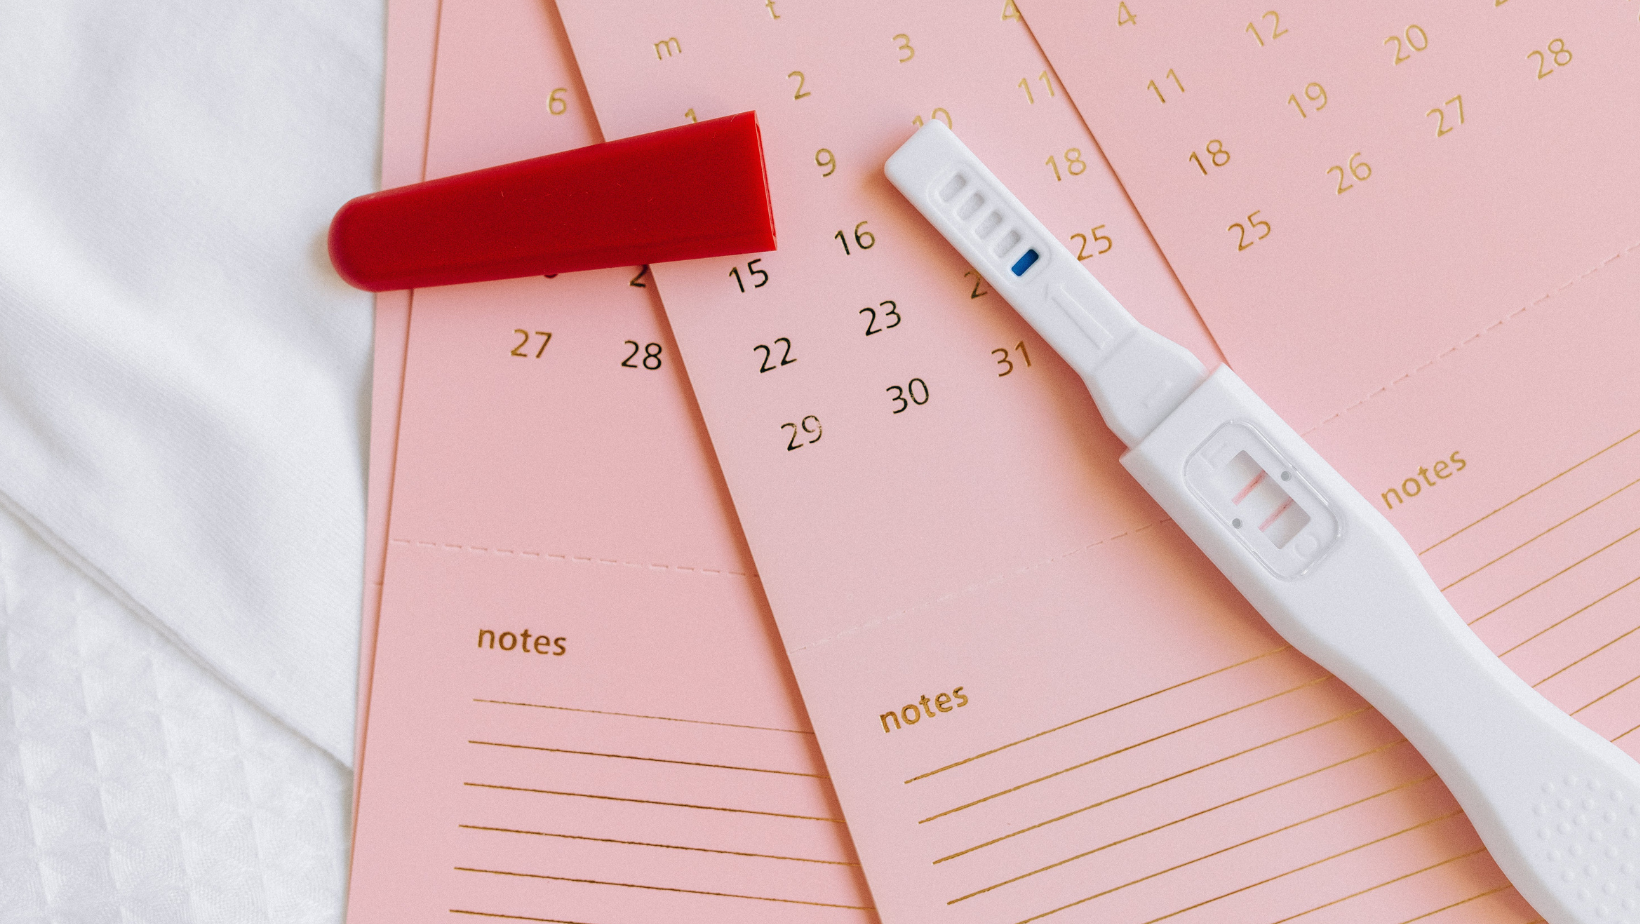 Pregnancy test lays on pink paper calendars